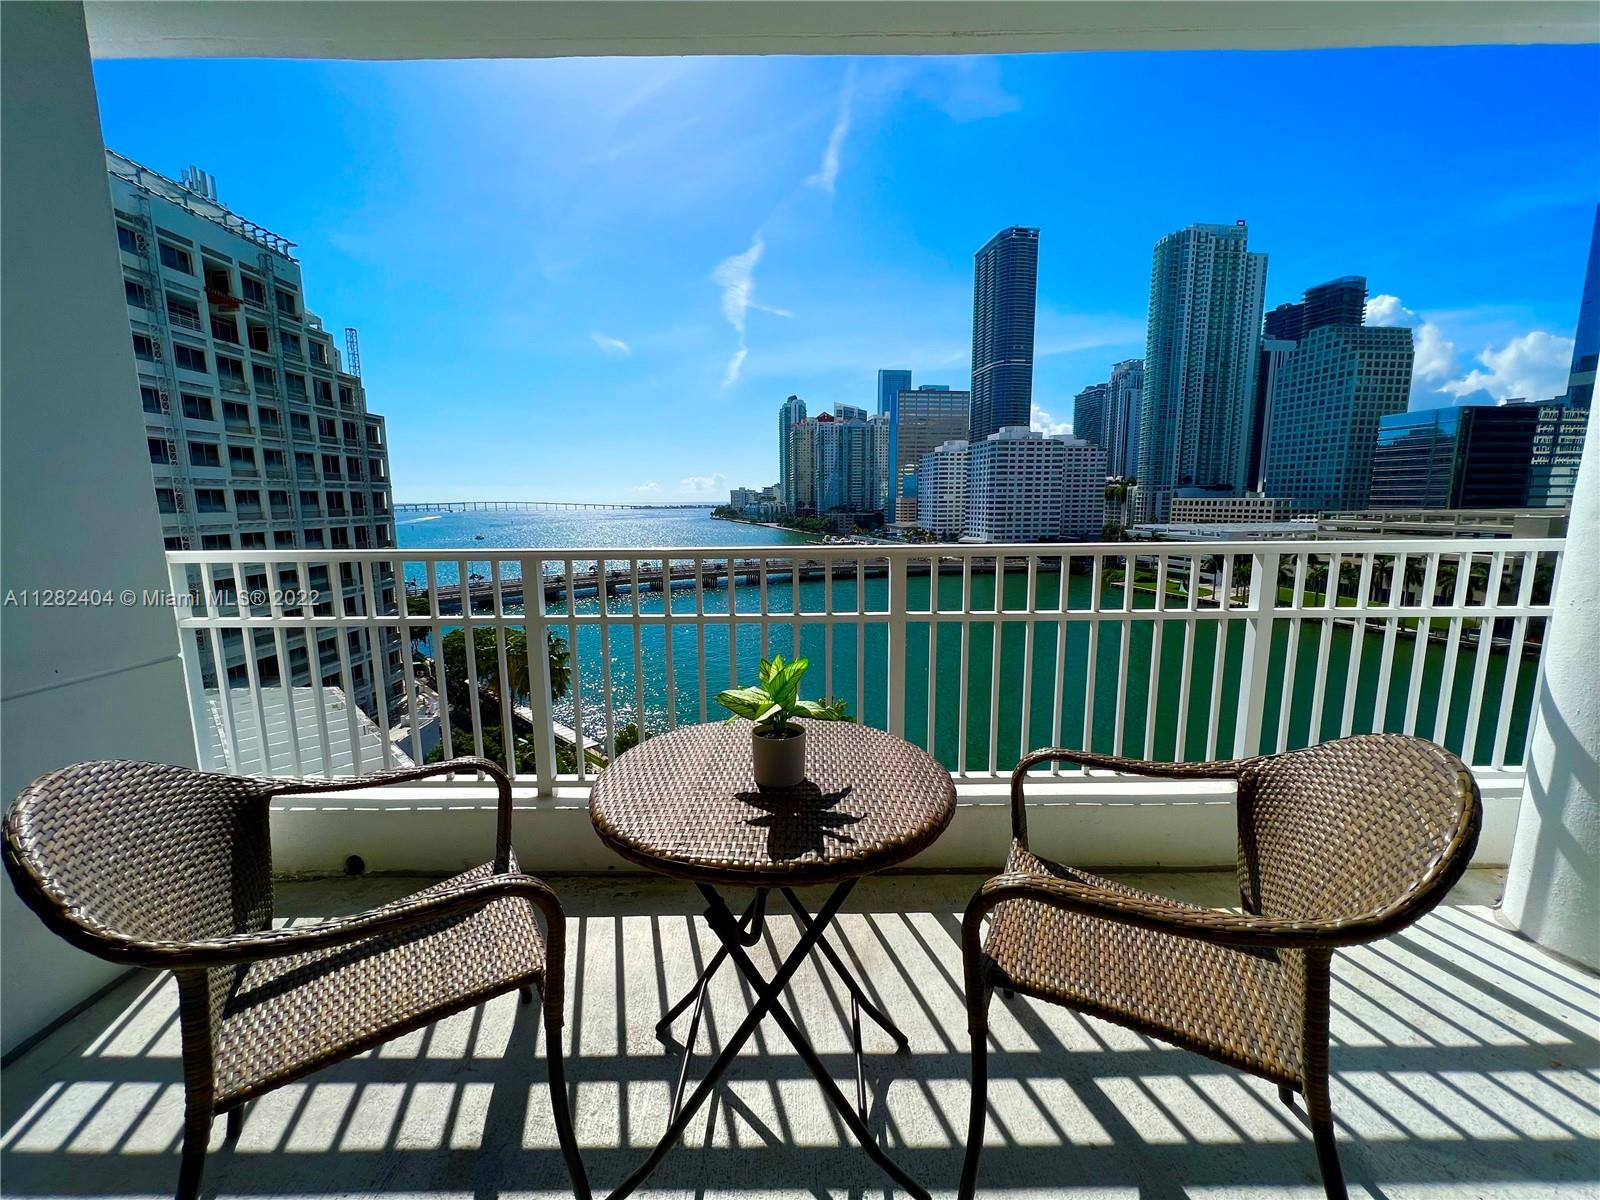 Beautiful 1 bed/1.5 bath unit that offers spectacular water views in the prestigious Courvoisier. Remodeled Kitchen and new floor. Enjoy the wonderful building amenities such as heated pool, media center, theater, billiard room, gym, racquetball courts, 24-hour security, valet and just minutes away from Brickell City Centre, Downtown Miami and Miami Beach with its best local markets and restaurants a few steps away.